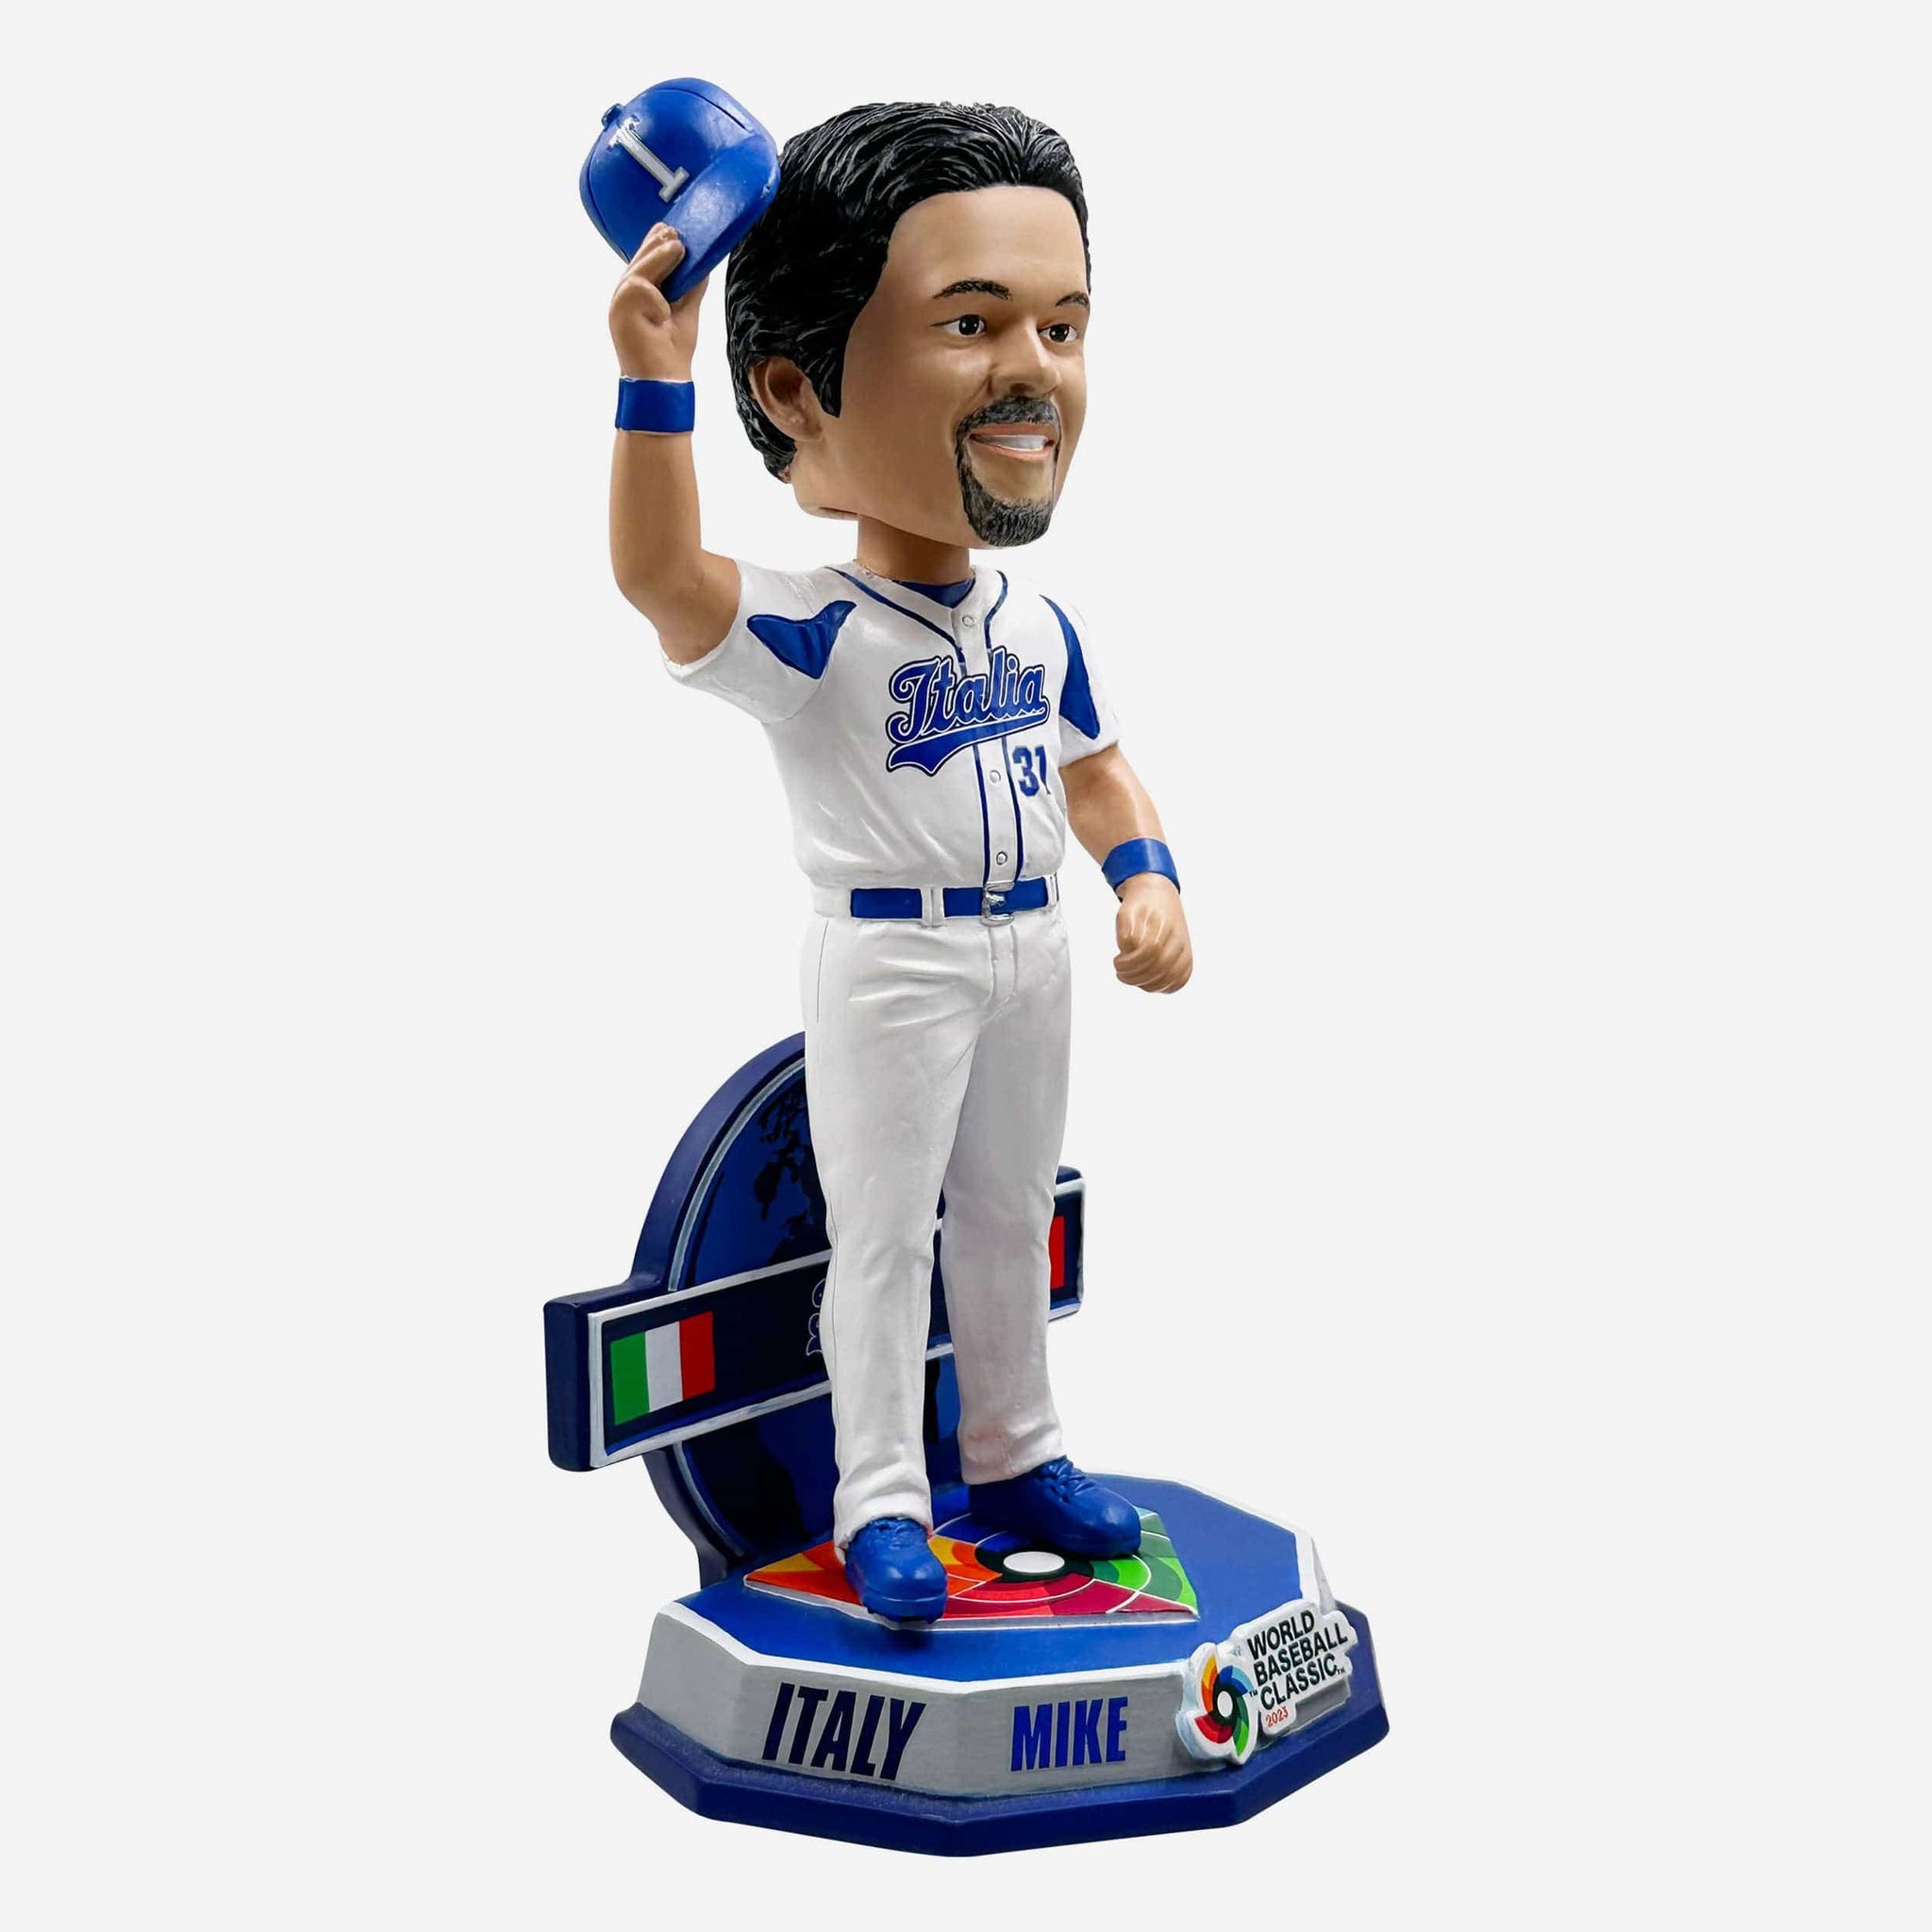 Italy 2023 World Baseball Classic Bobbles on Parade Bobblehead Officially Licensed by World Baseball Classic